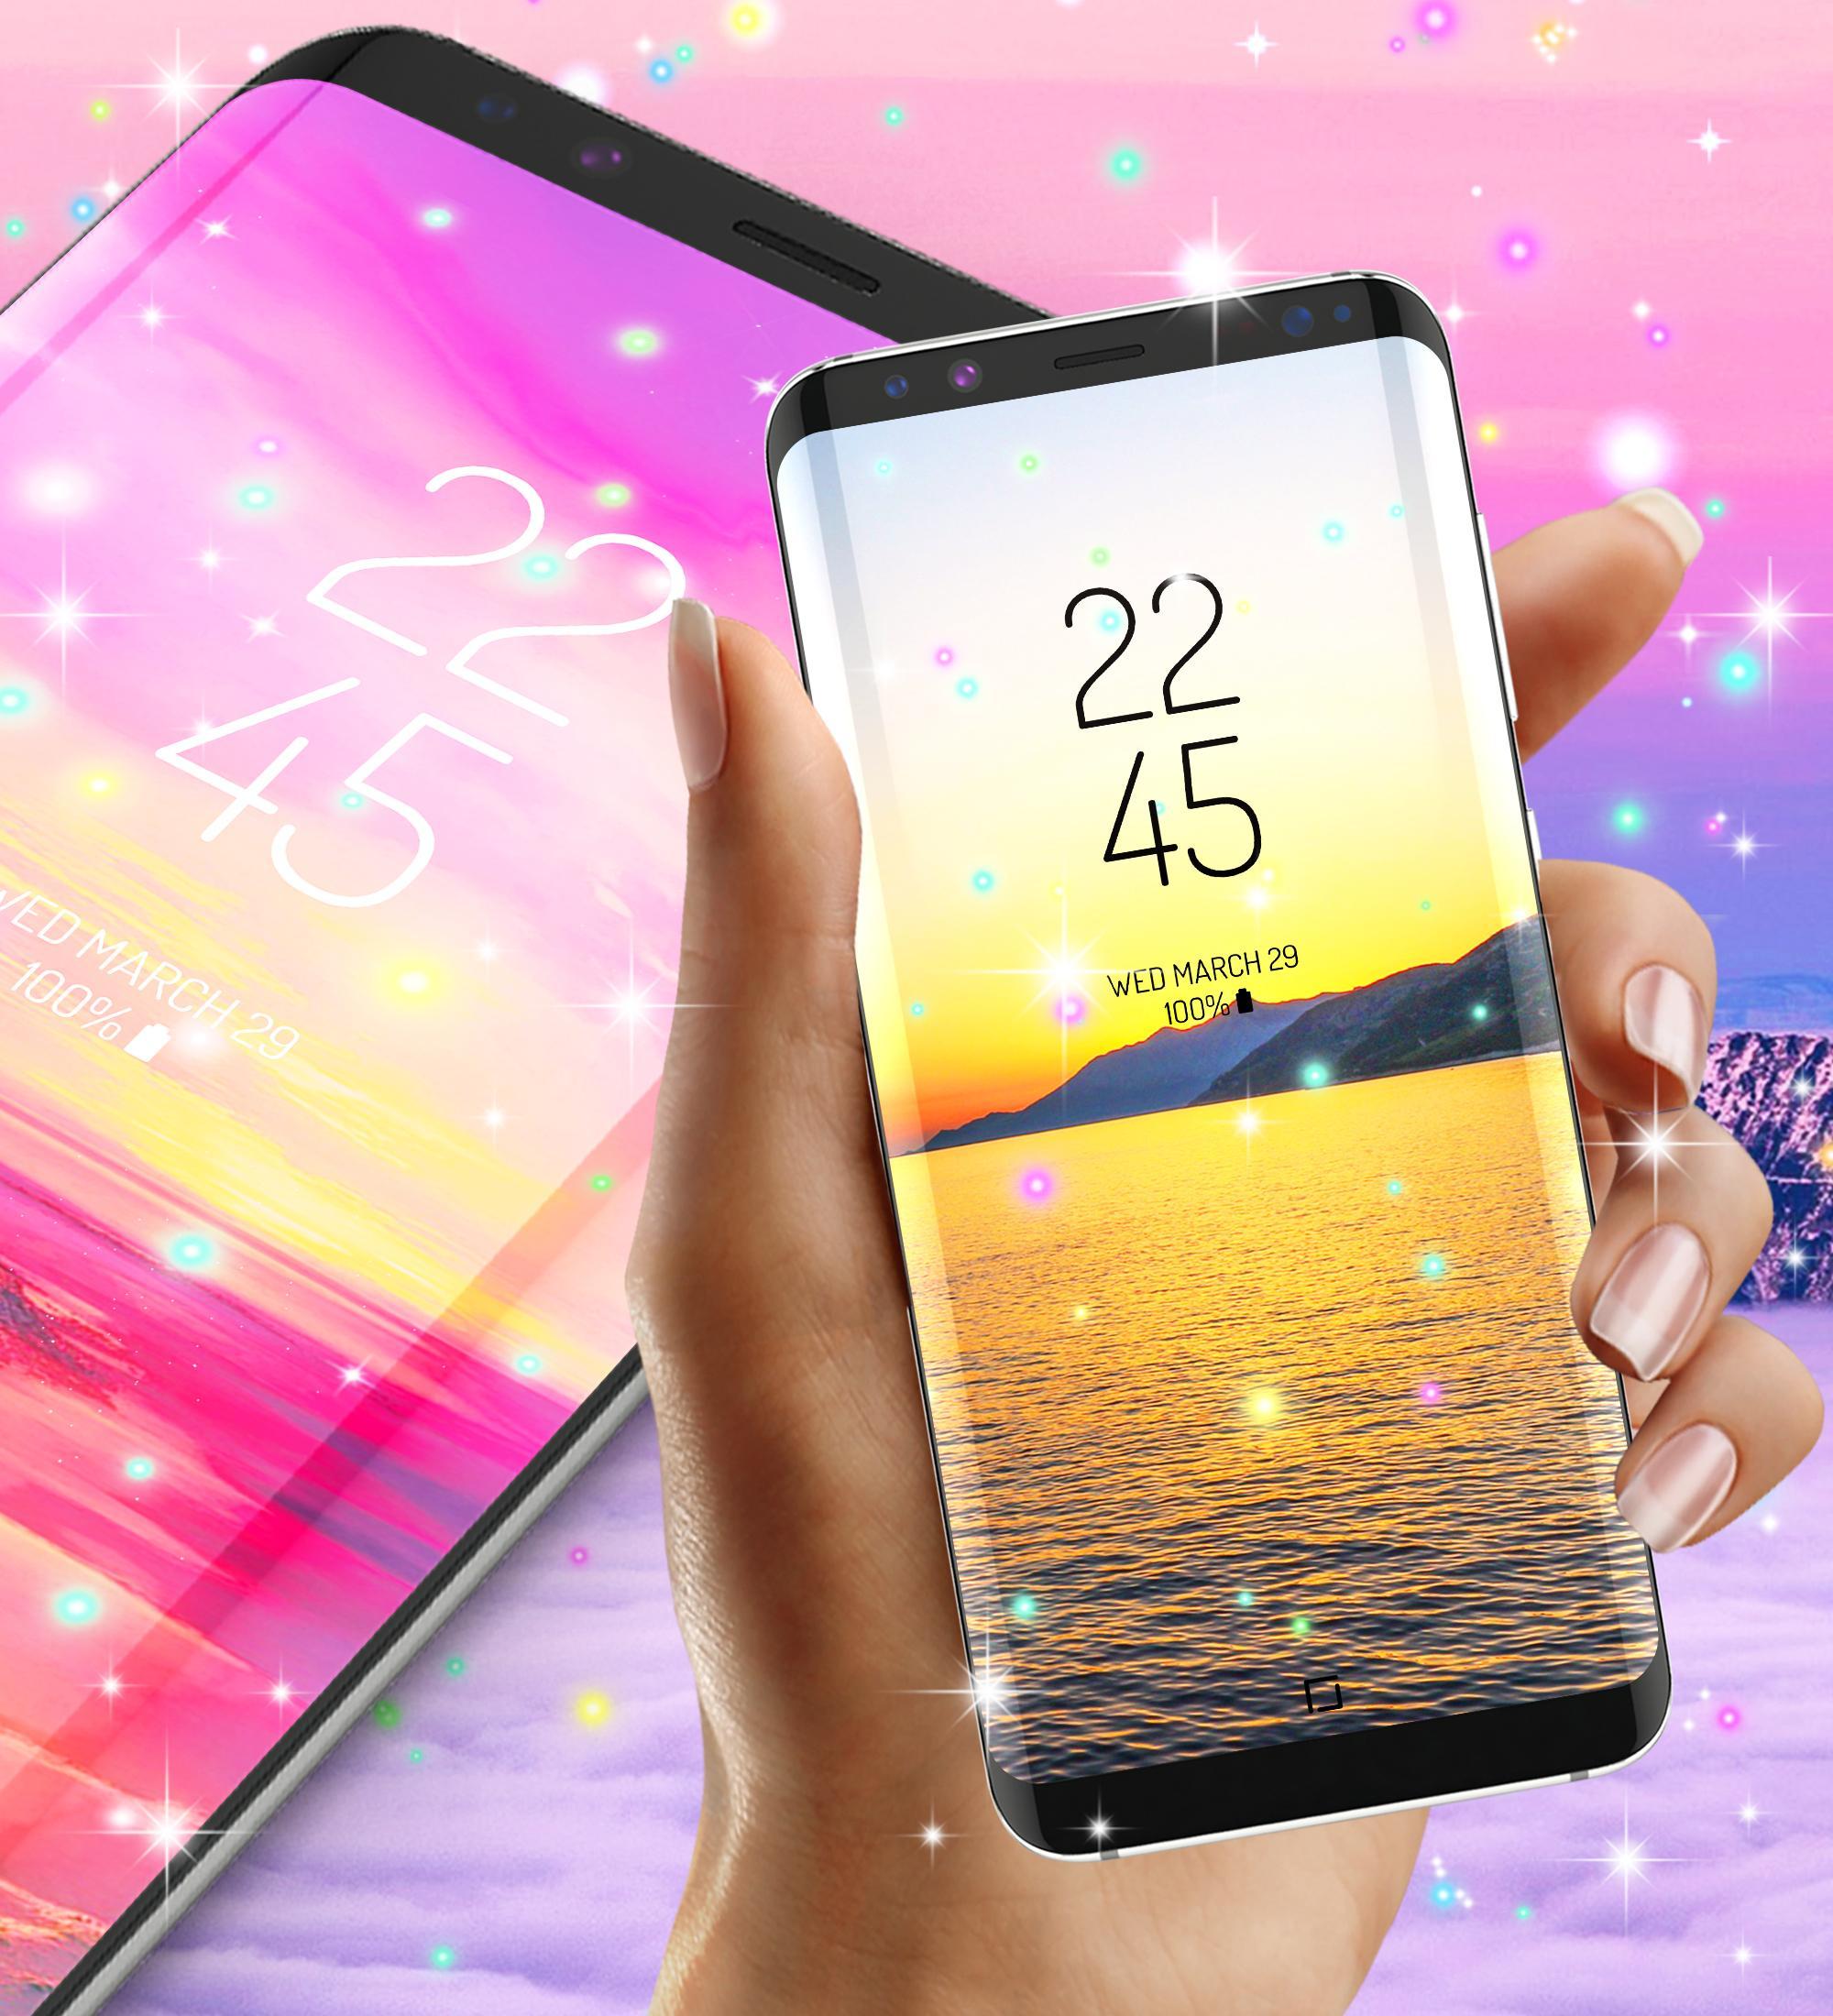 Live wallpaper for galaxy note 10 for Android - APK Download